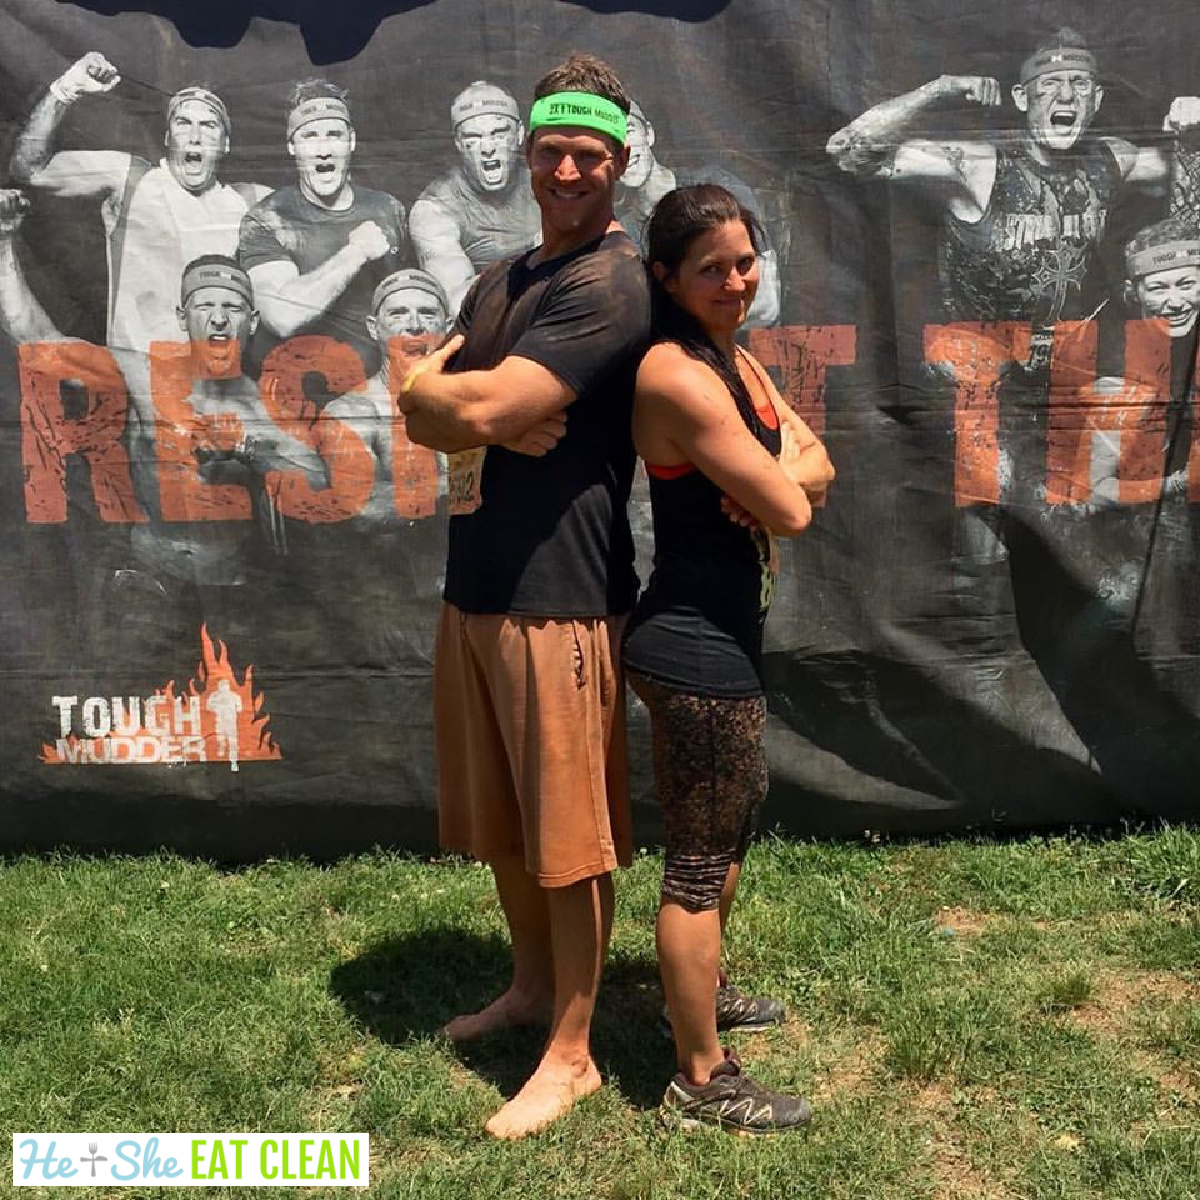 male and female standing back to back after the Tough Mudder race event